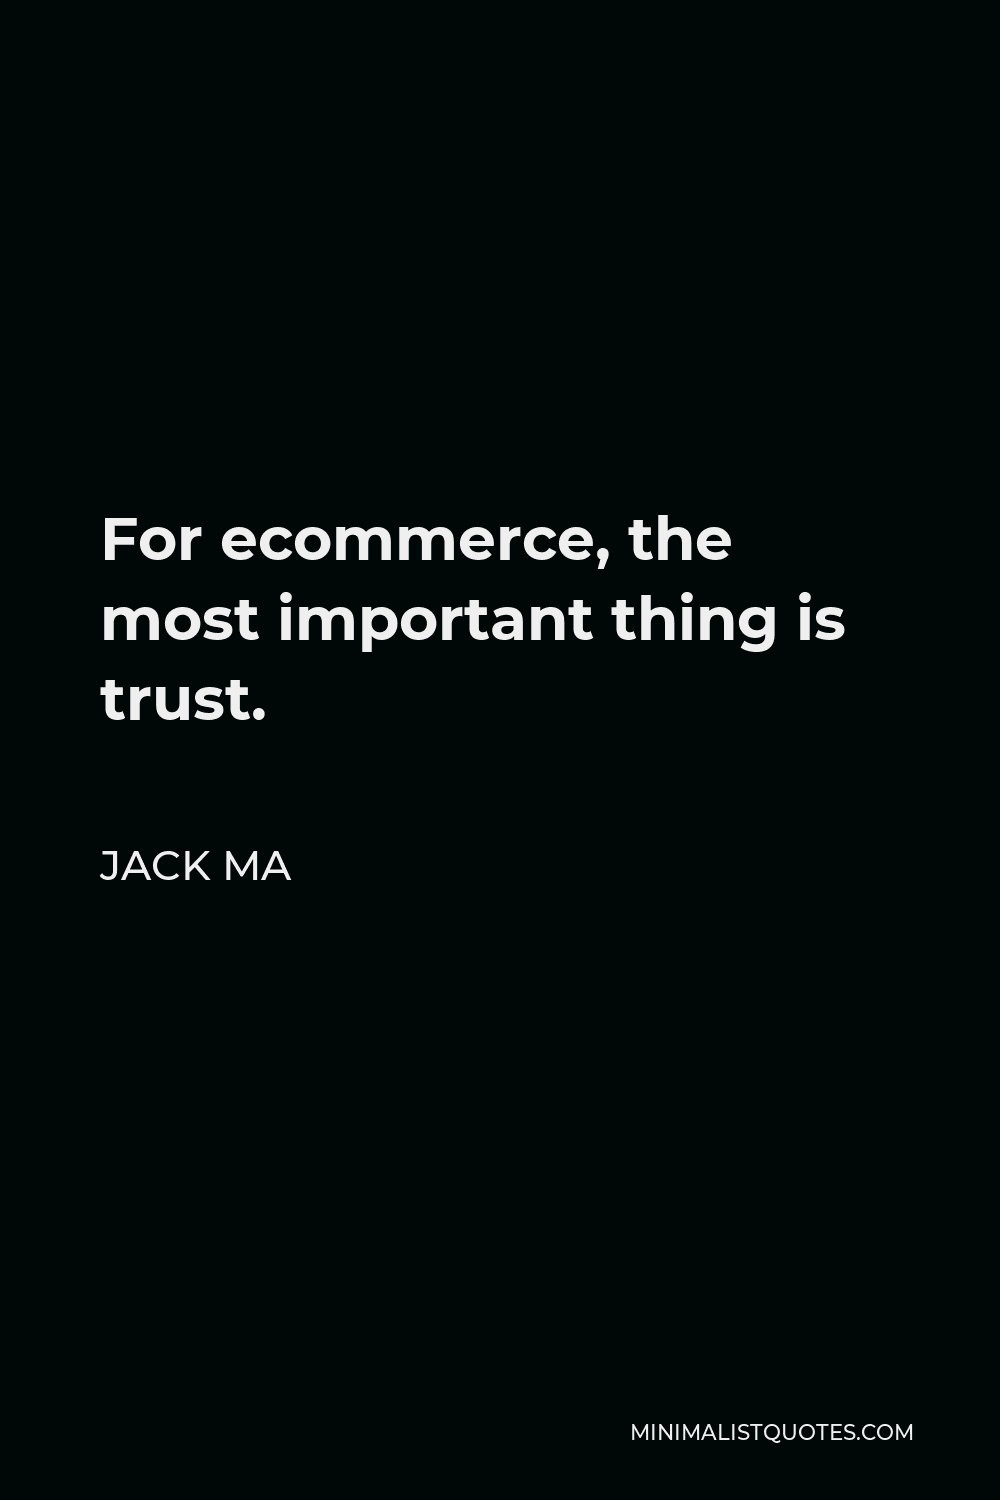 Jack Ma Quote - For ecommerce, the most important thing is trust.